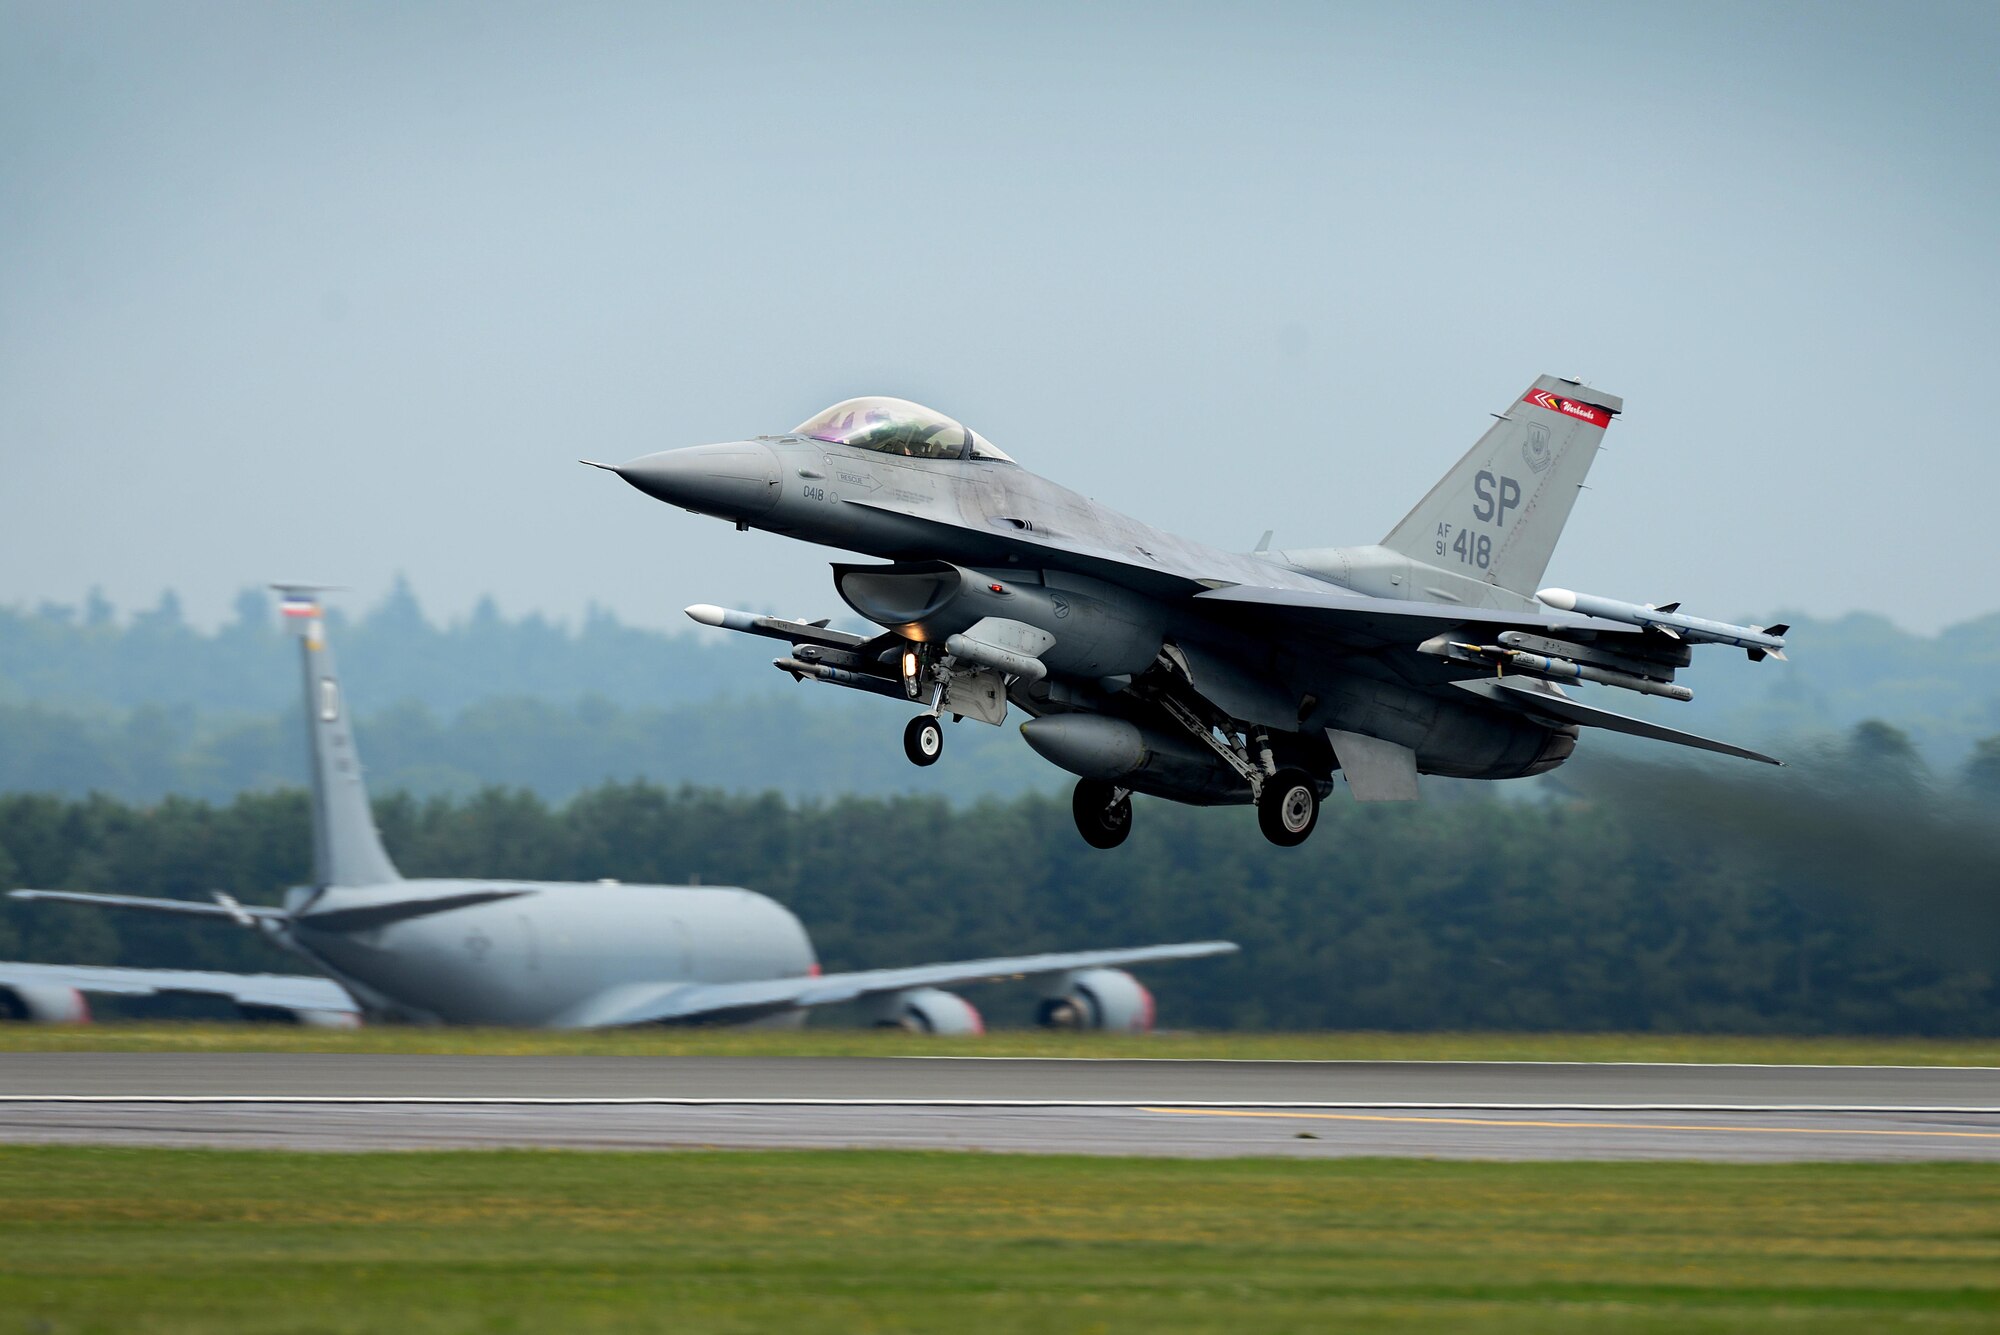 An F-16C Fighting Falcon assigned to the 480th Fighter Squadron, Spangdahlem Air Base, Germany, launches for a sortie in support of a flying training exercise at Royal Air Force Lakenheath, England, July 25. Eighteen F-16 Fighting Falcon aircraft and more than 260 Airmen from the 52nd Fighter Wing, Spangdahlem Air Base, Germany, completed a three-week flying training deployment July 31. (U.S. Air Force photo/ Tech. Sgt. Matthew Plew)